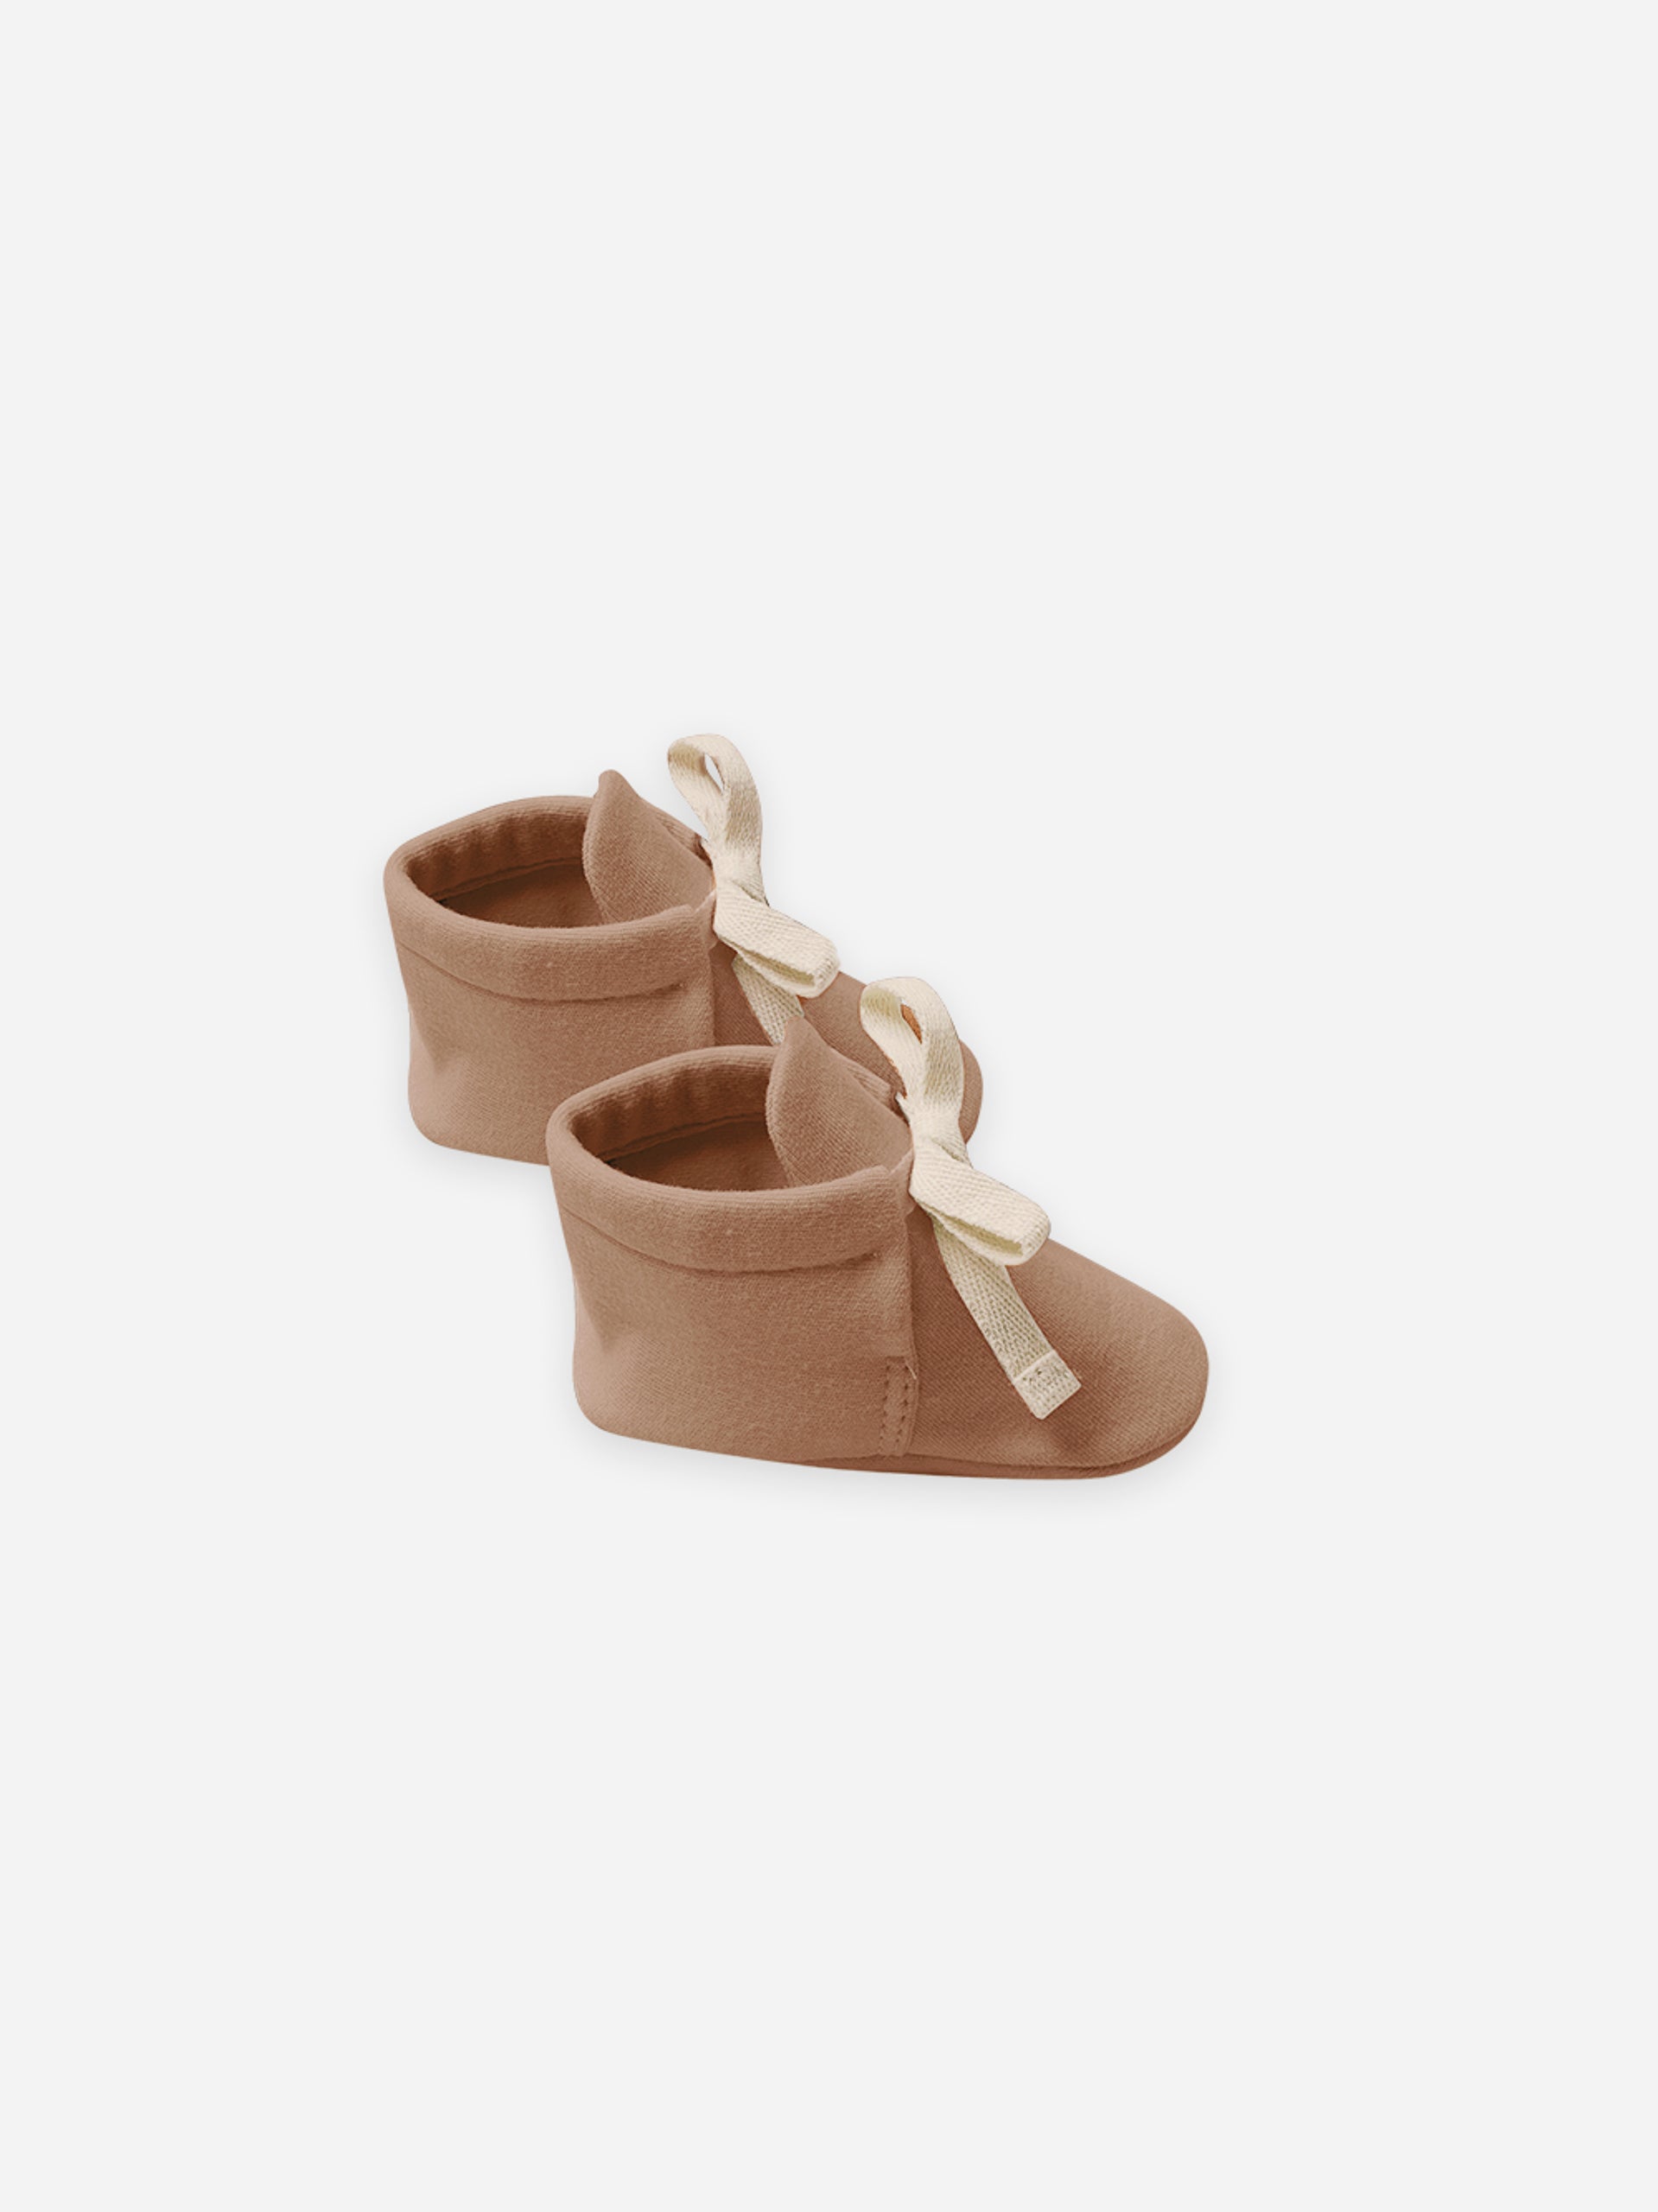 baby booties | clay - Quincy Mae | Baby Basics | Baby Clothing | Organic Baby Clothes | Modern Baby Boy Clothes |